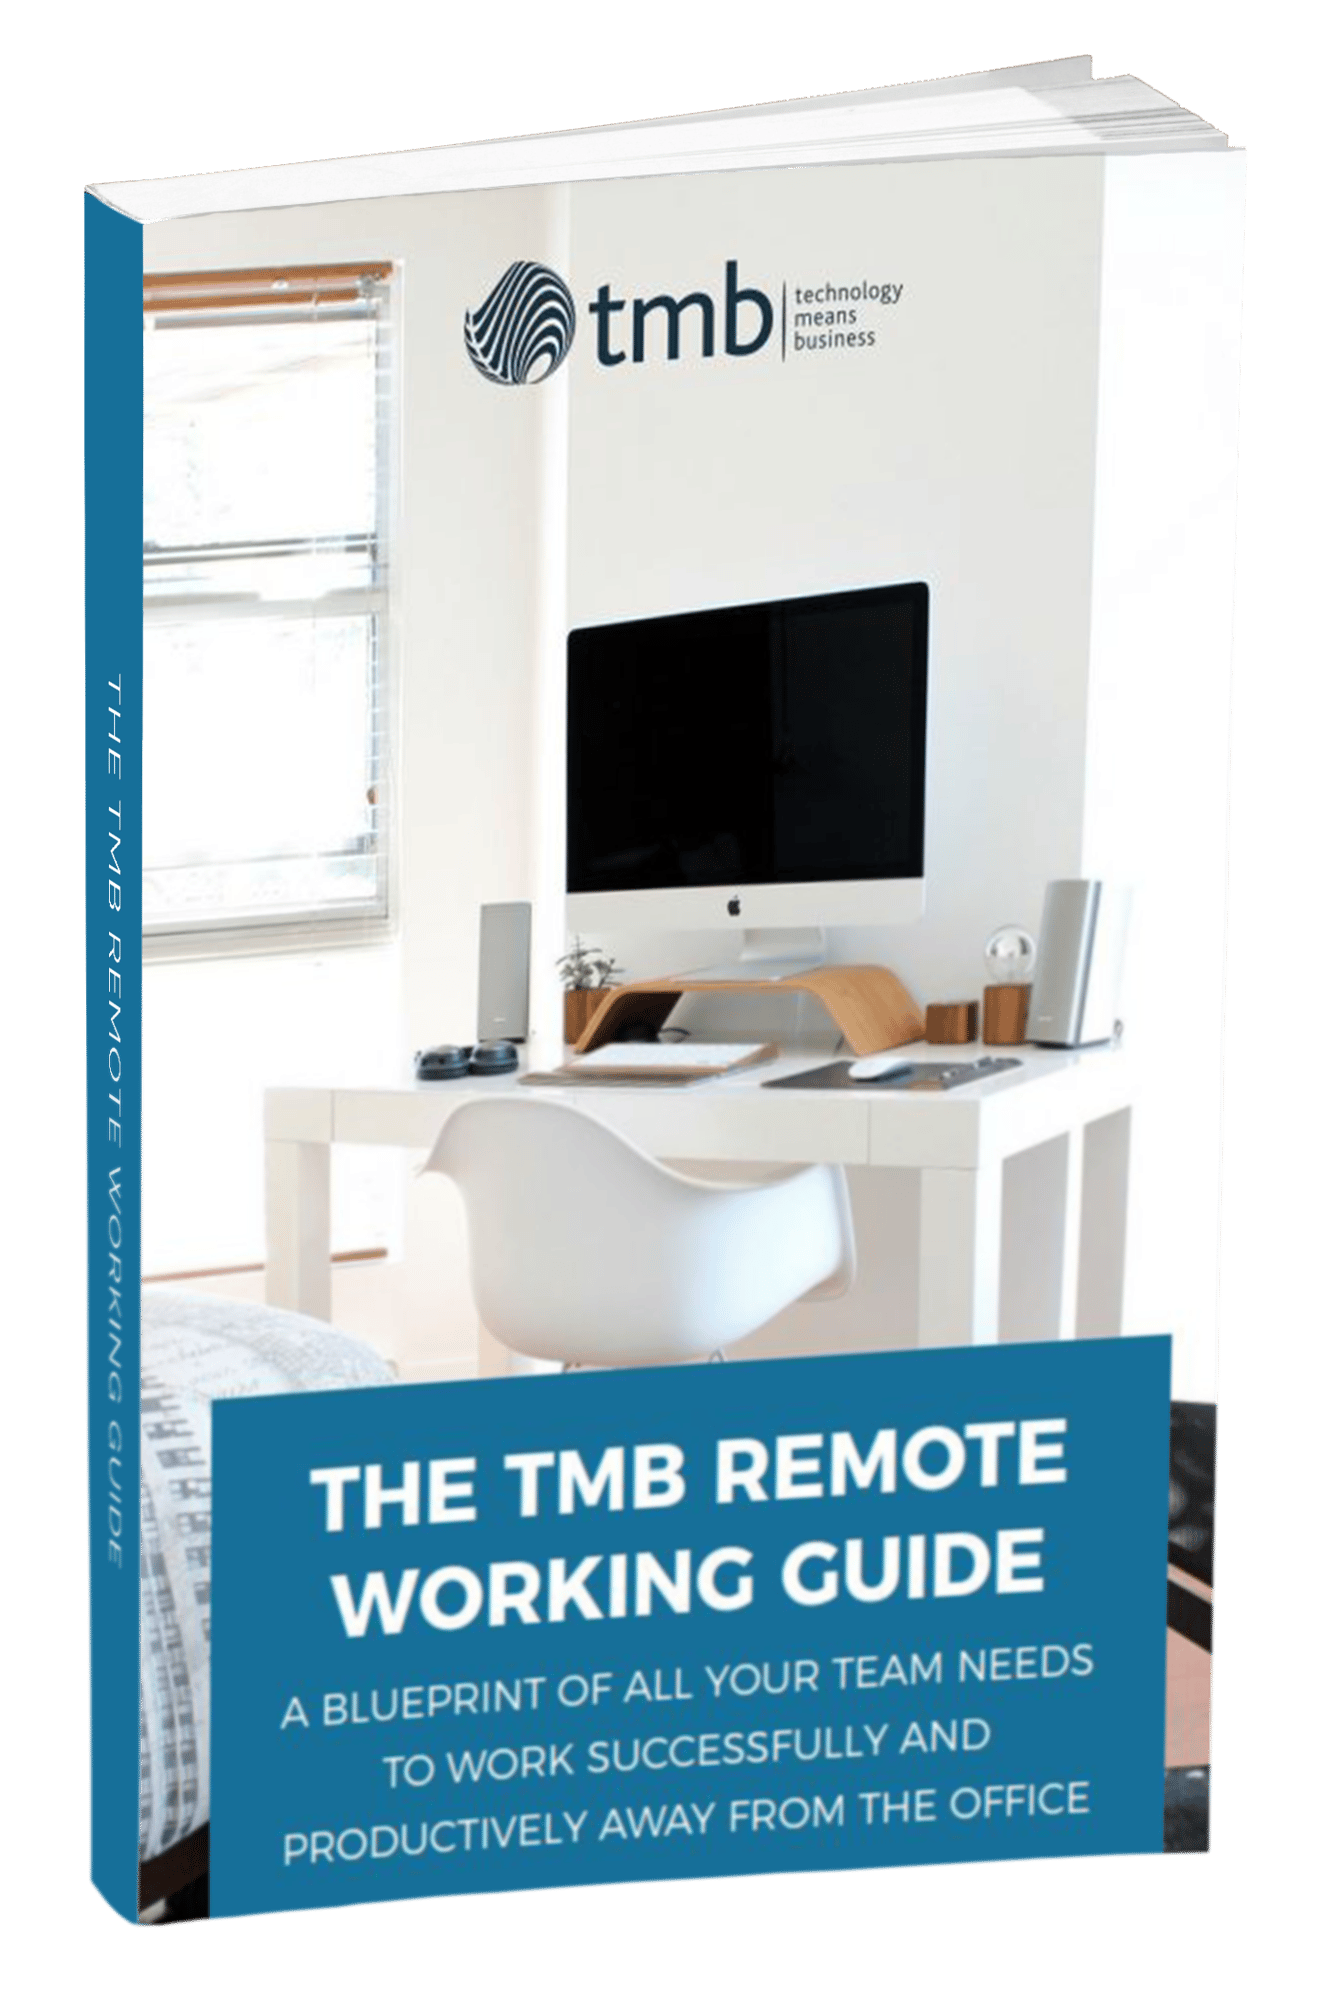 tmb-remote-working-guide-mock-up